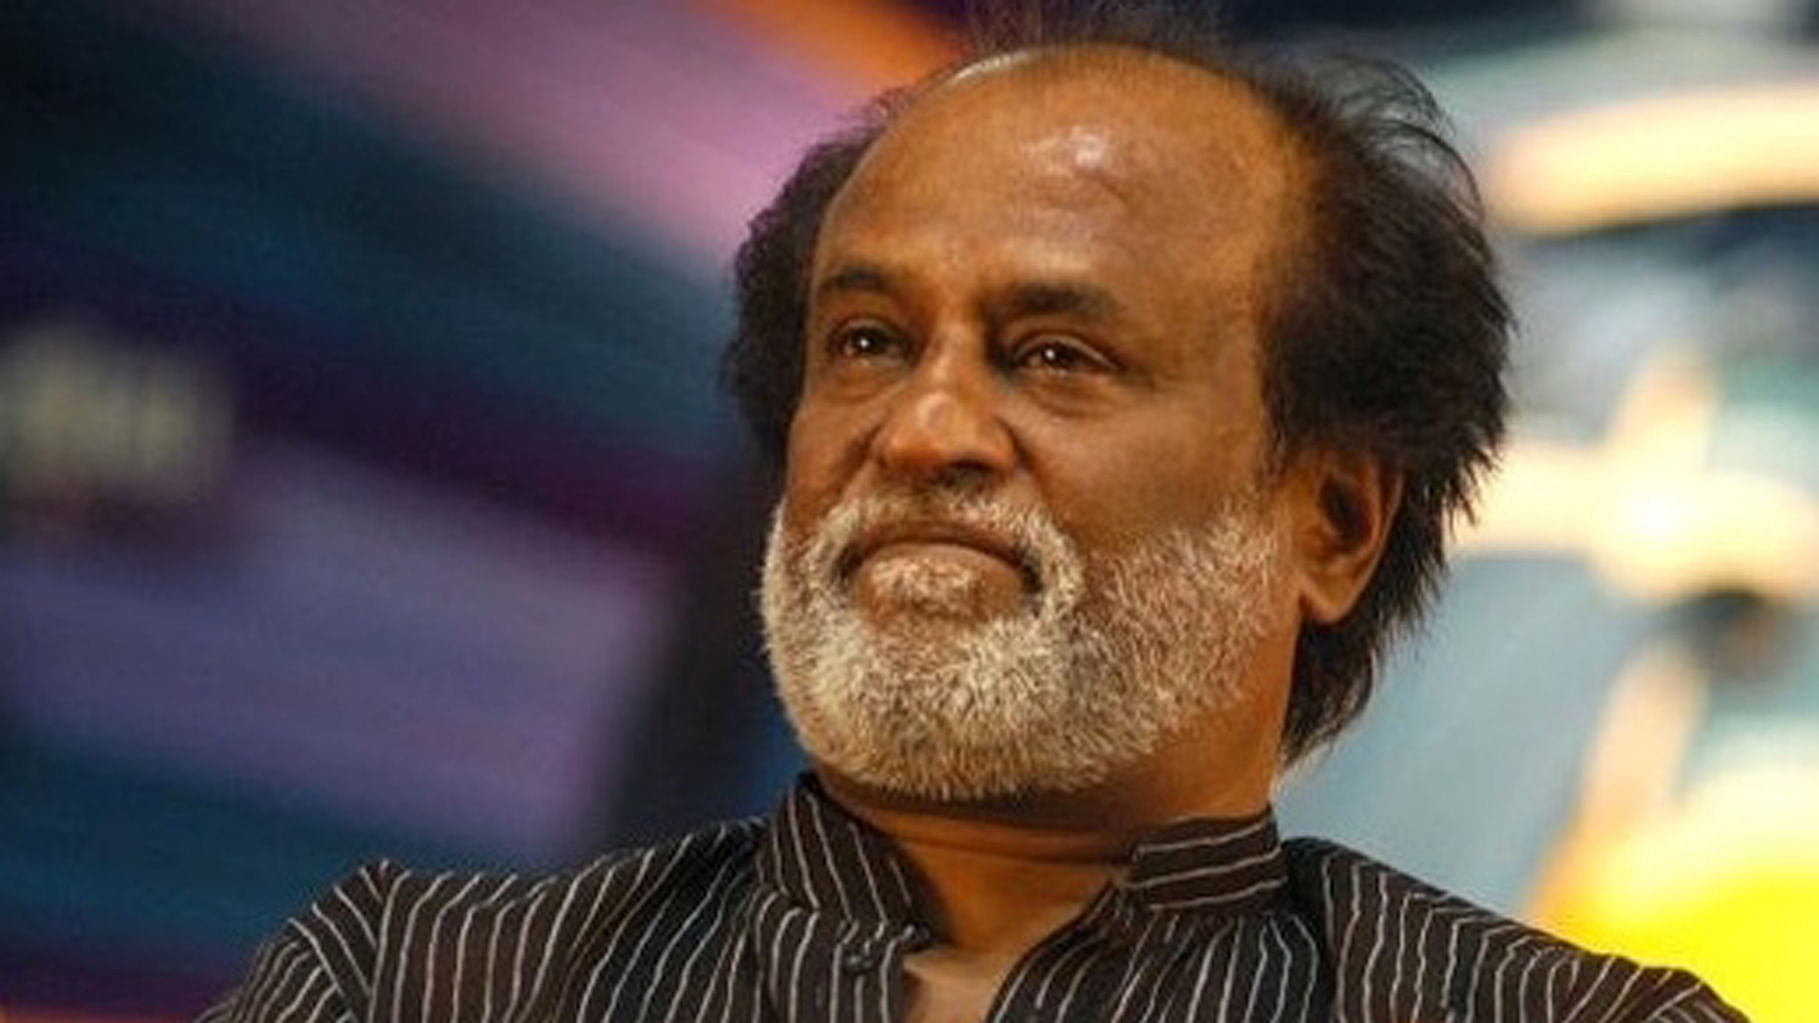 Rajinikanth was admitted to Apollo Hospitals in Hyderabad for severe blood pressure fluctuation on 25 December.